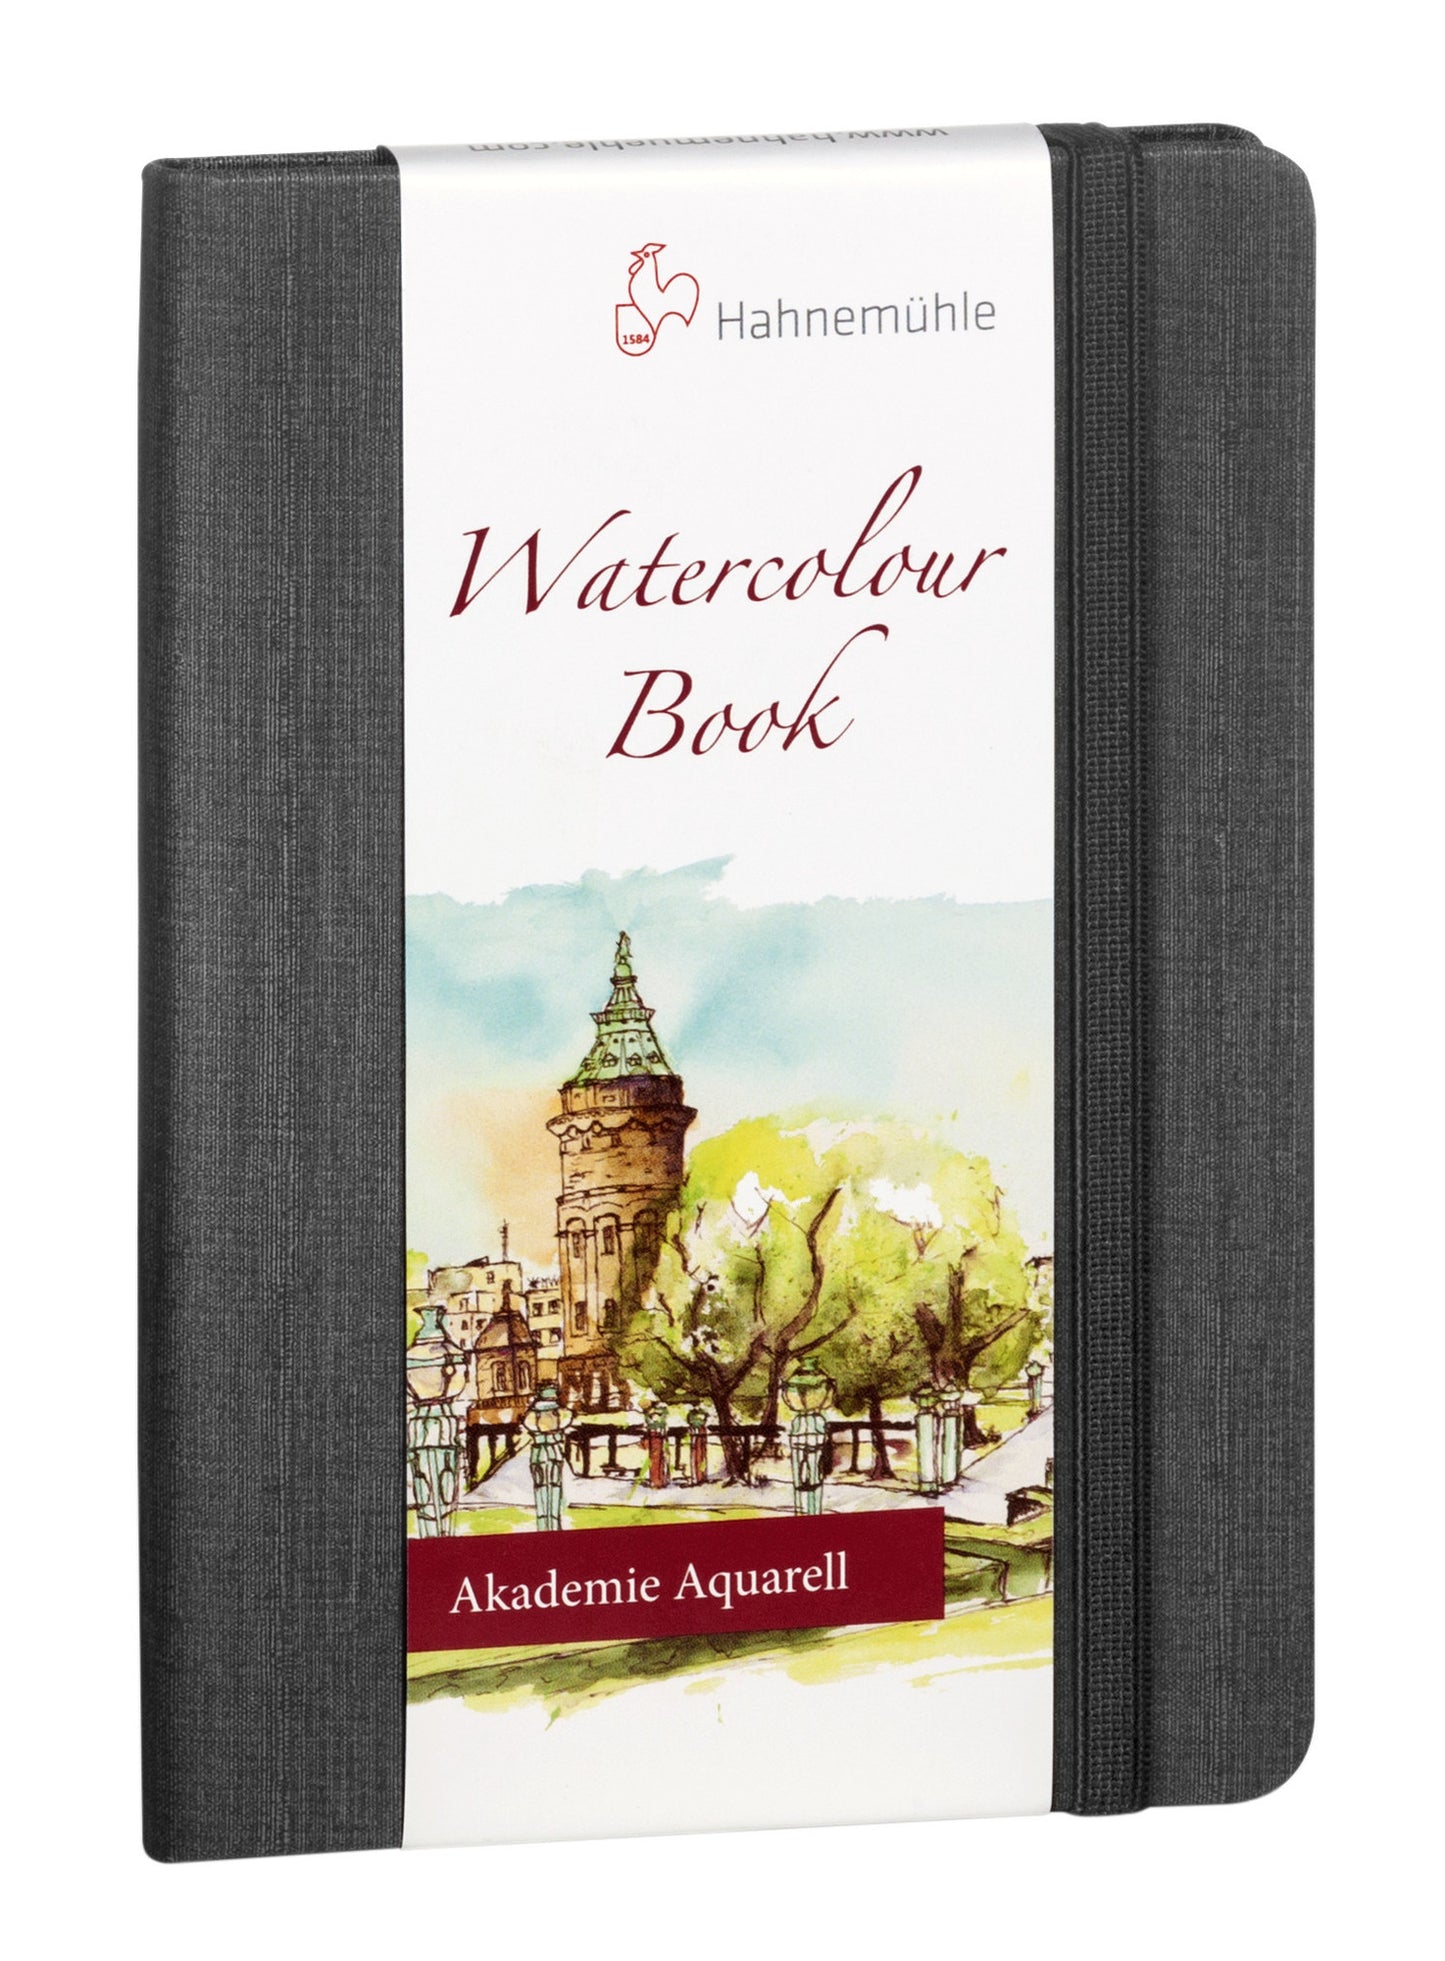 A5 (portrait) Akademie Watercolour Book by Hahnemuhle